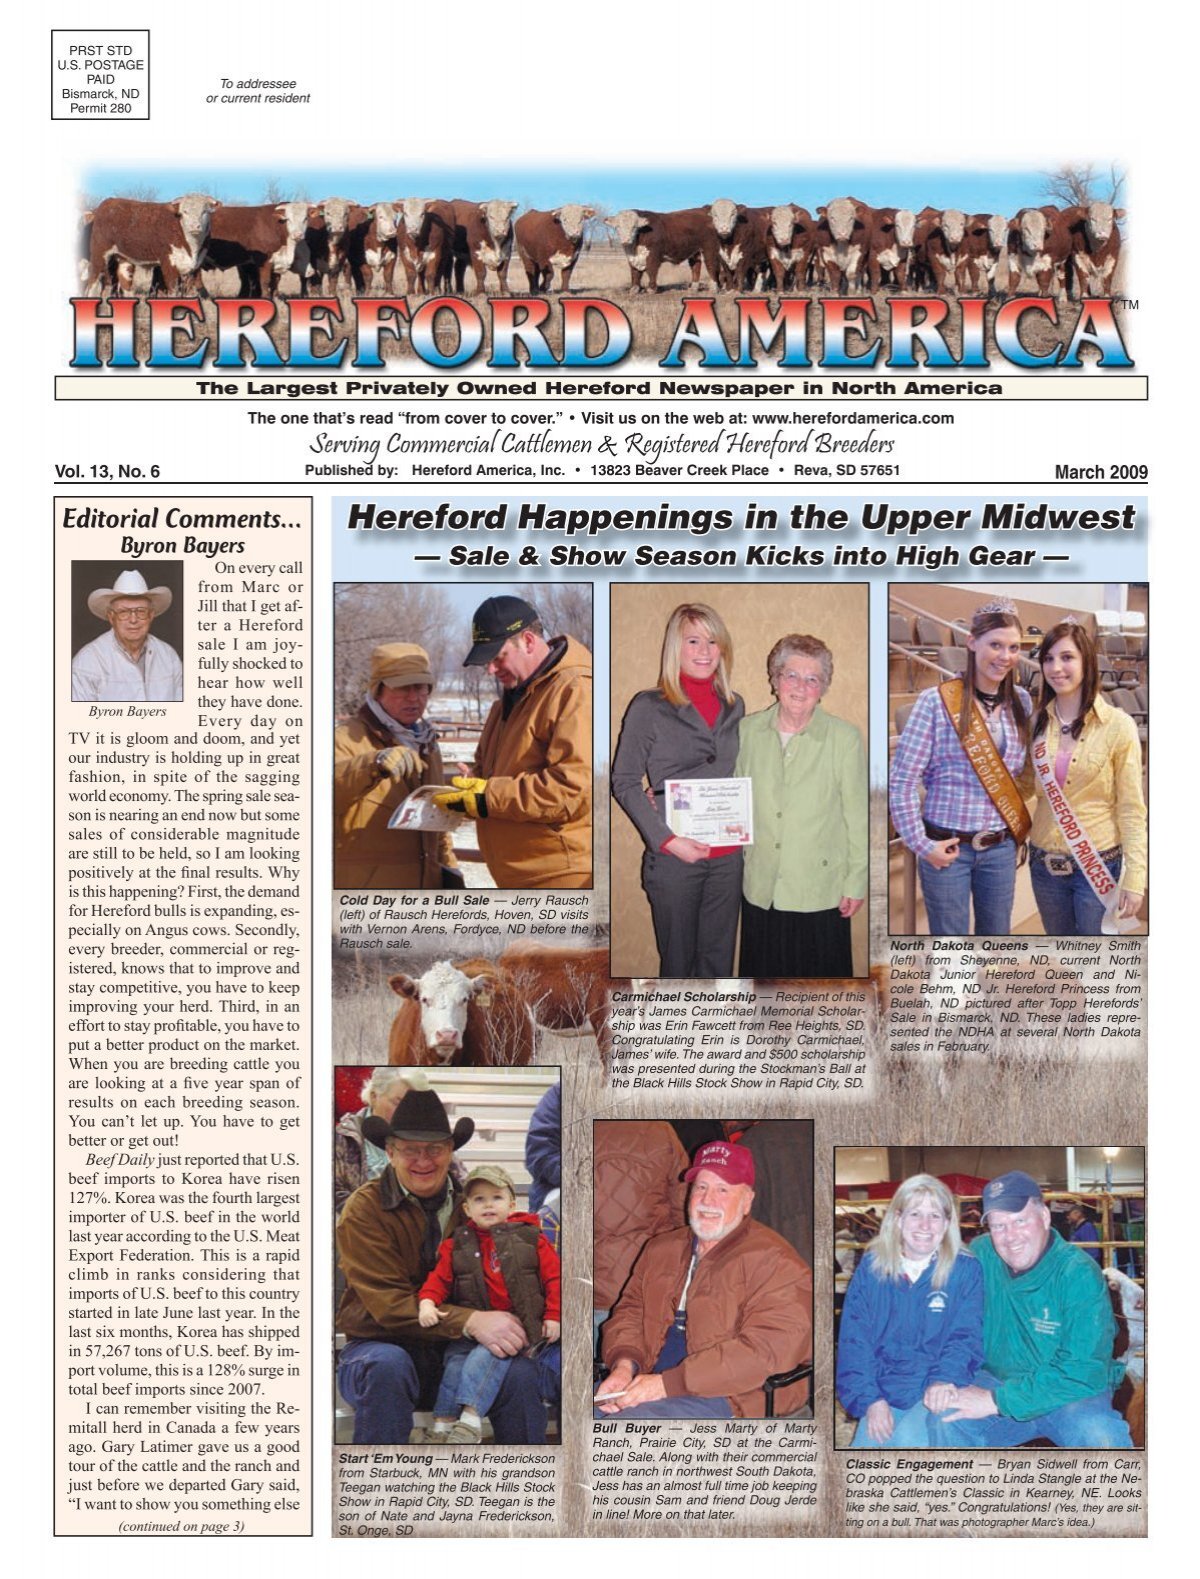 March 2009 Issue (pdf - 19451 kb) - Hereford America